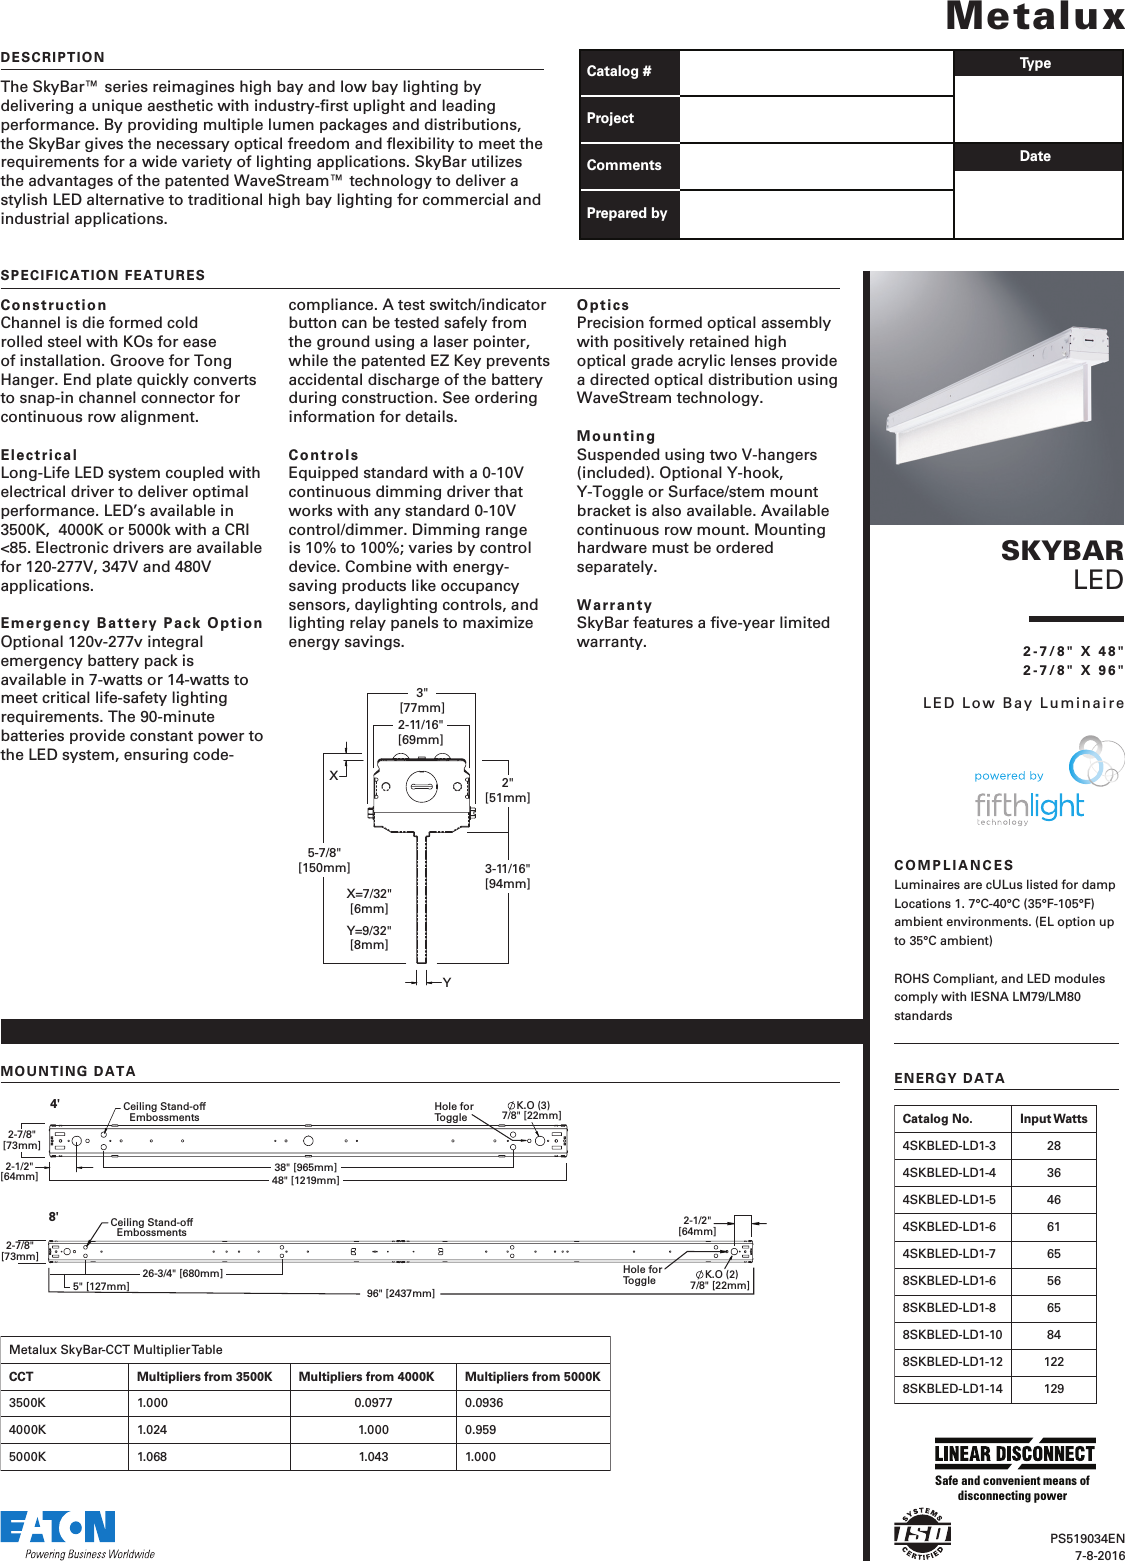 Page 1 of 5 - Metalux SKYBAR Single LED Low Bay Luminaire Specification Sheet  1000425627-Catalog